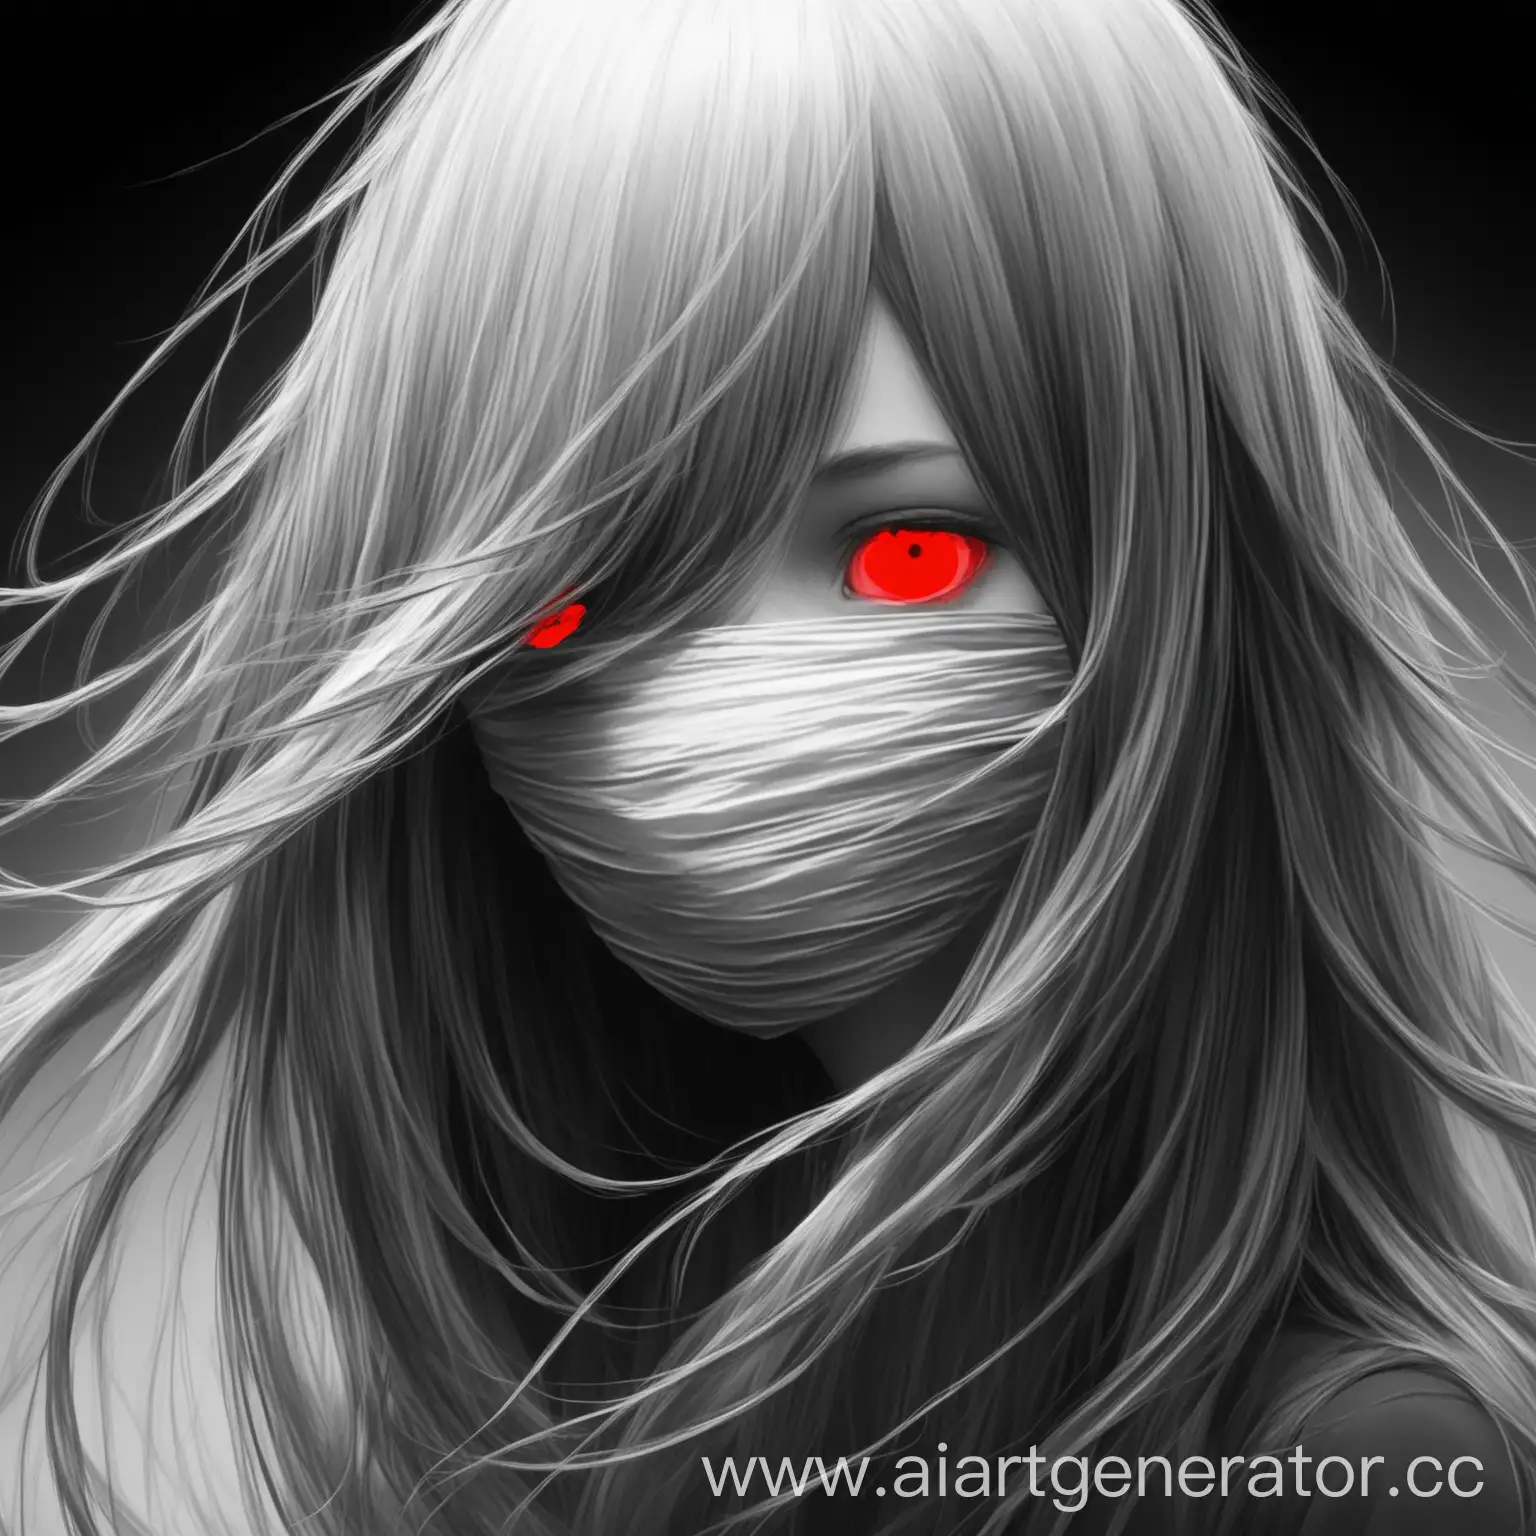 Mysterious-Girl-with-Hair-Veiling-Face-in-Monochrome-with-a-Hint-of-Red